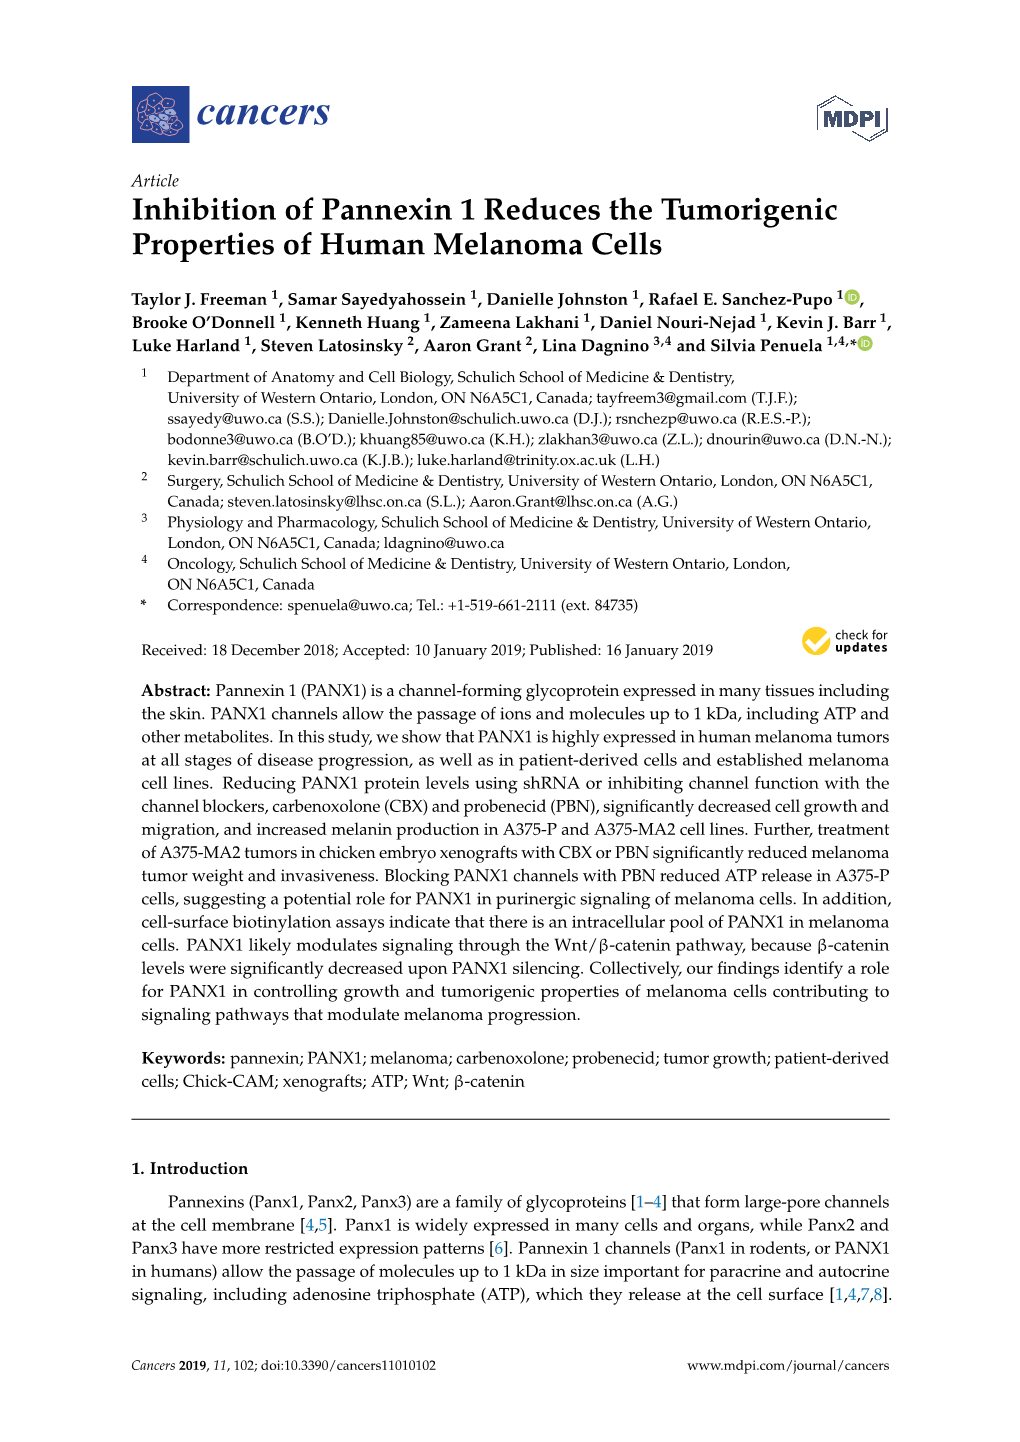 Inhibition of Pannexin 1 Reduces the Tumorigenic Properties of Human Melanoma Cells